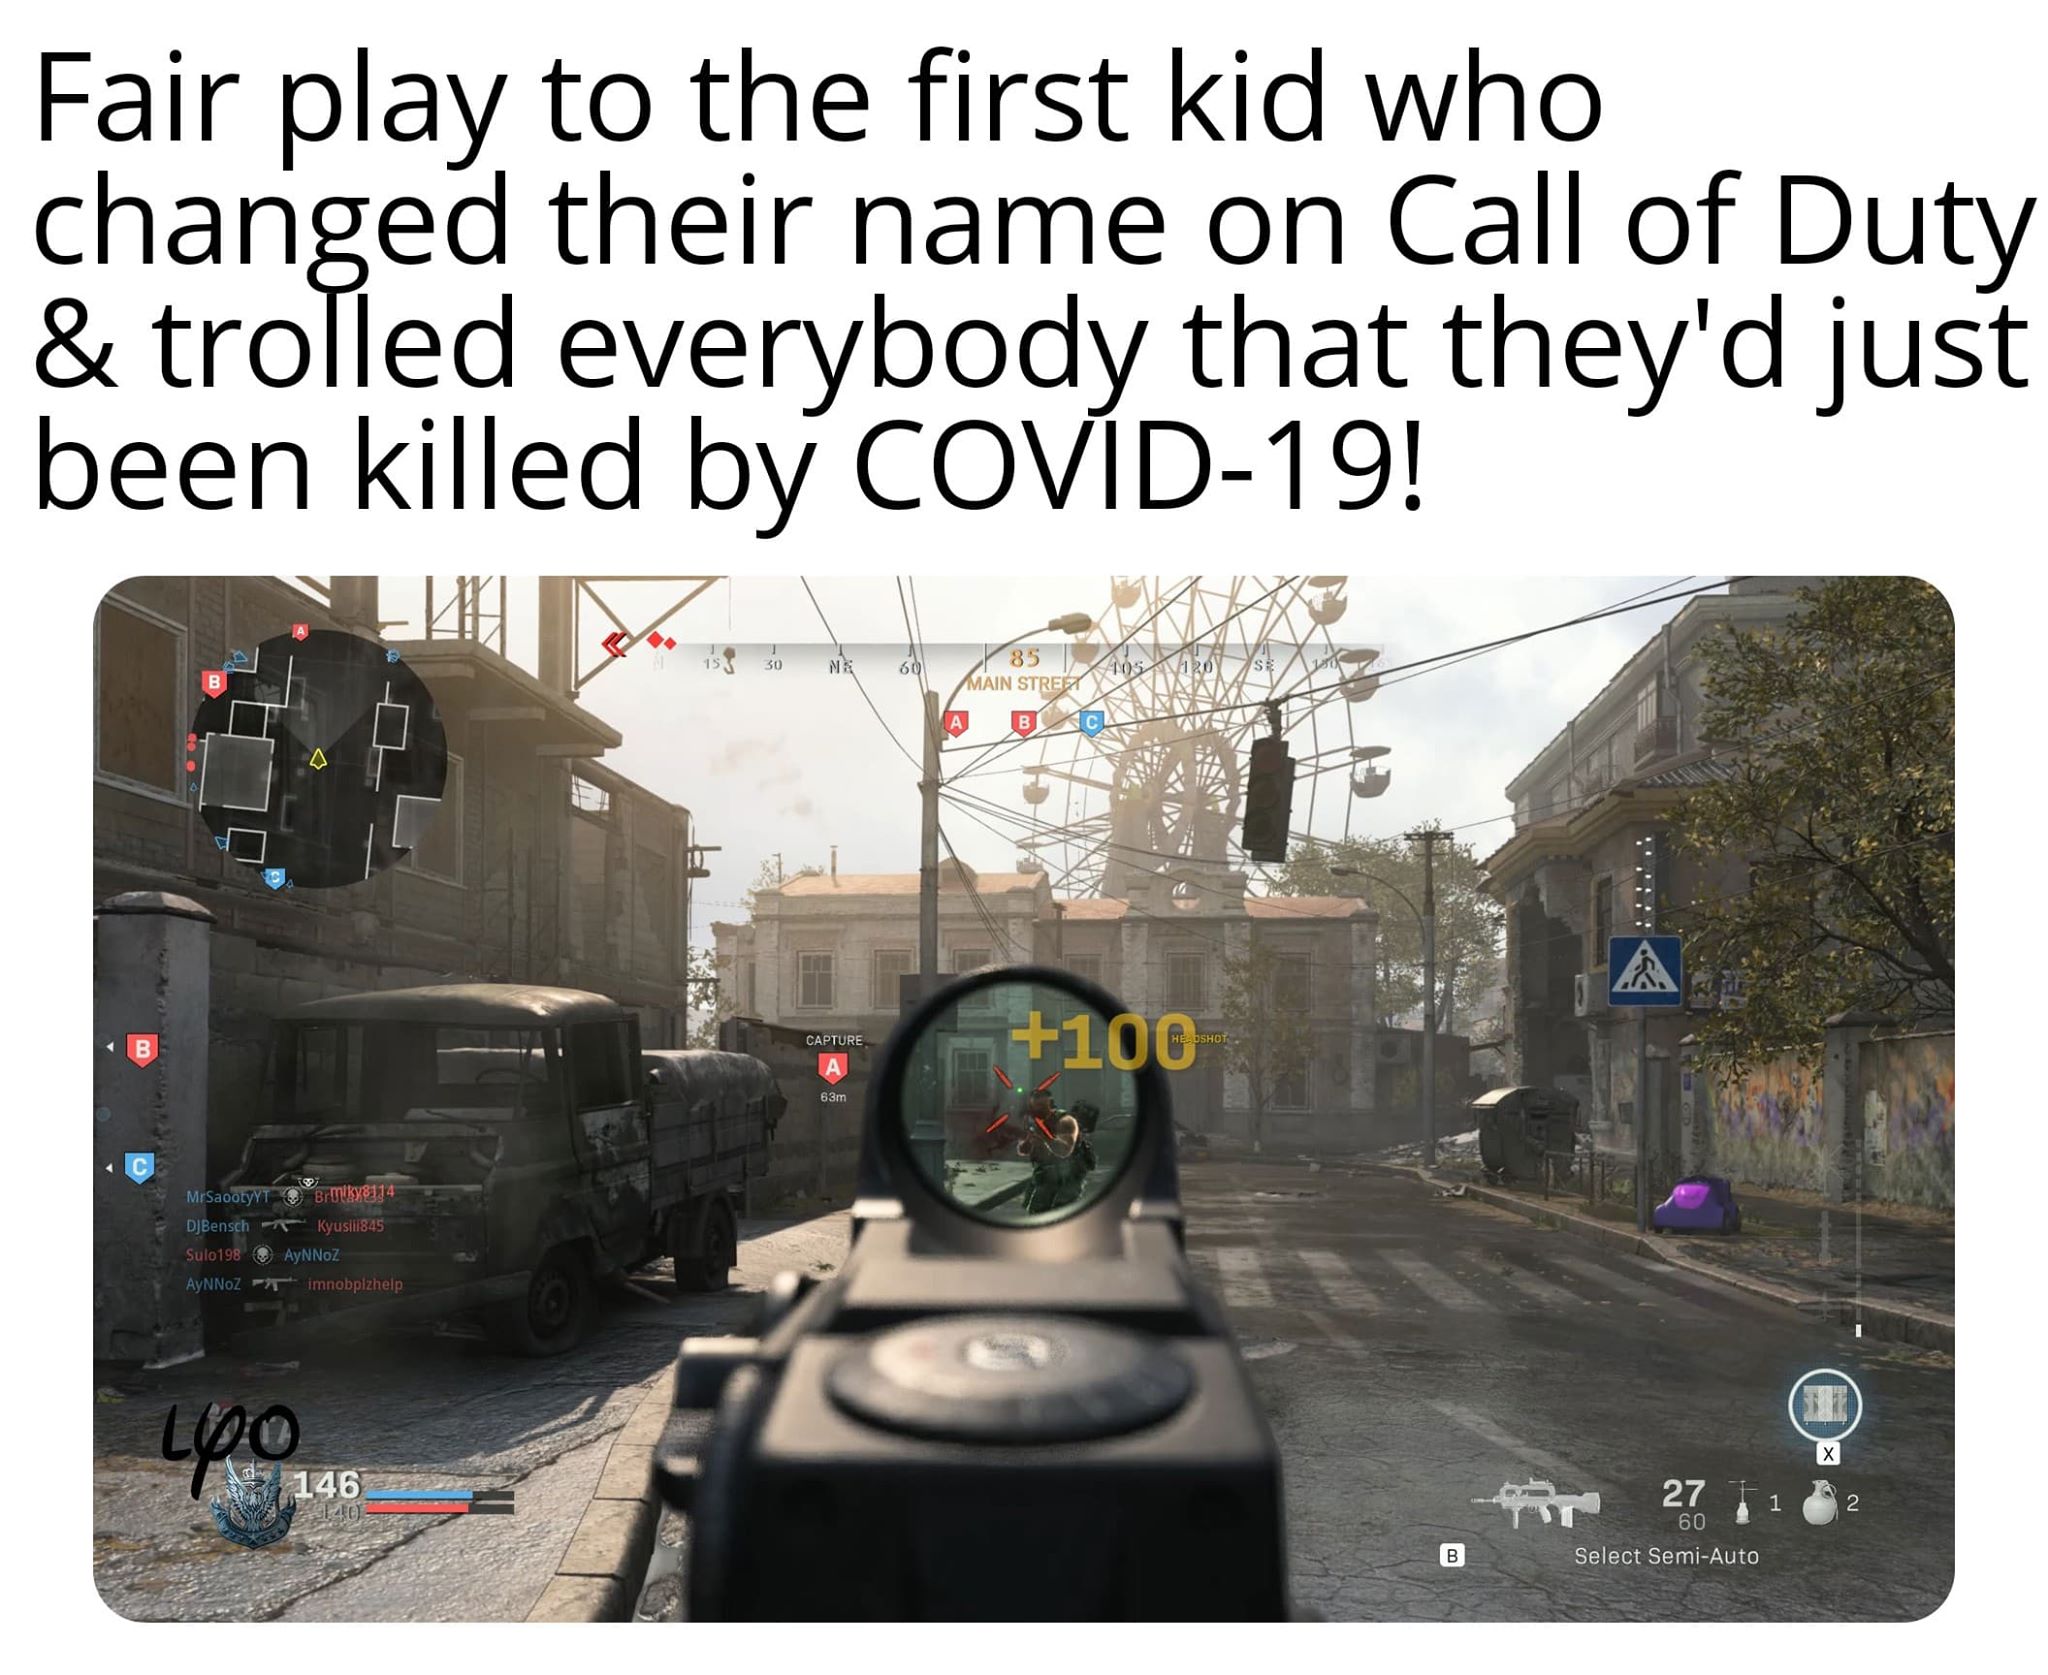 Fair play to the first kid who changed their name on Call of Duty & trolled everybody that they'd just been killed by Covid19! iss 3o 35 los Se Main Stret Capture 100 Headshot 63m MrSaootyyn DJBensch Sulo198 Aynnoz T Brolky8114 Kyusi1845 AyNNOZ…